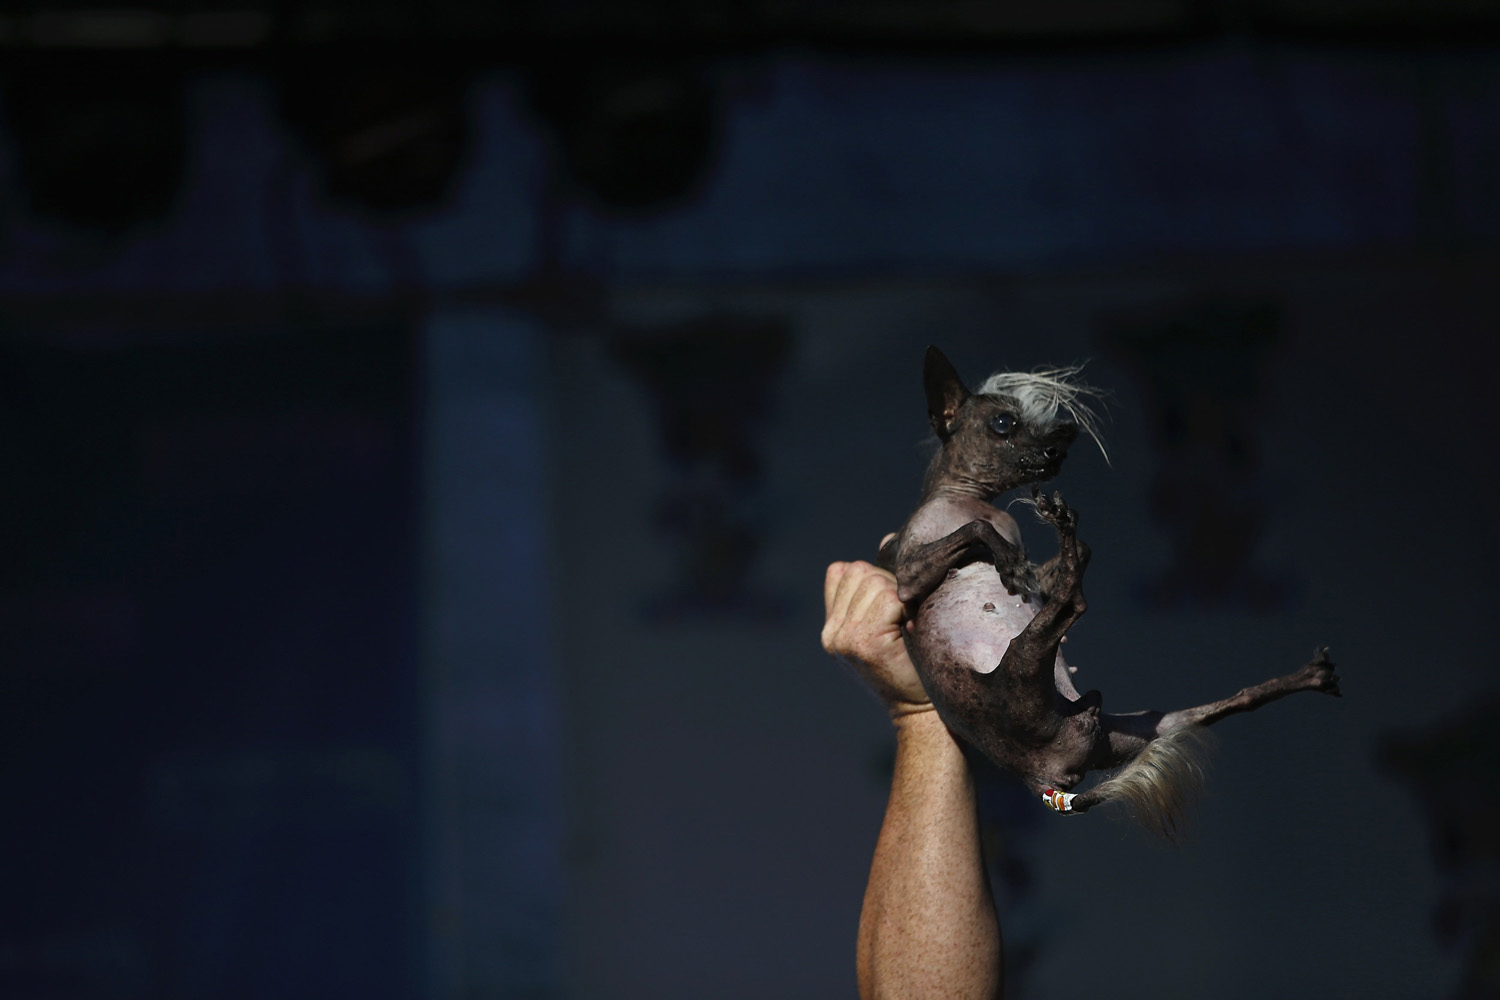 SweePee Rambo, a two-year-old Chihuahua Chinese Crested mix, is raised in the air during the 2014 World's Ugliest Dog contest in Petaluma